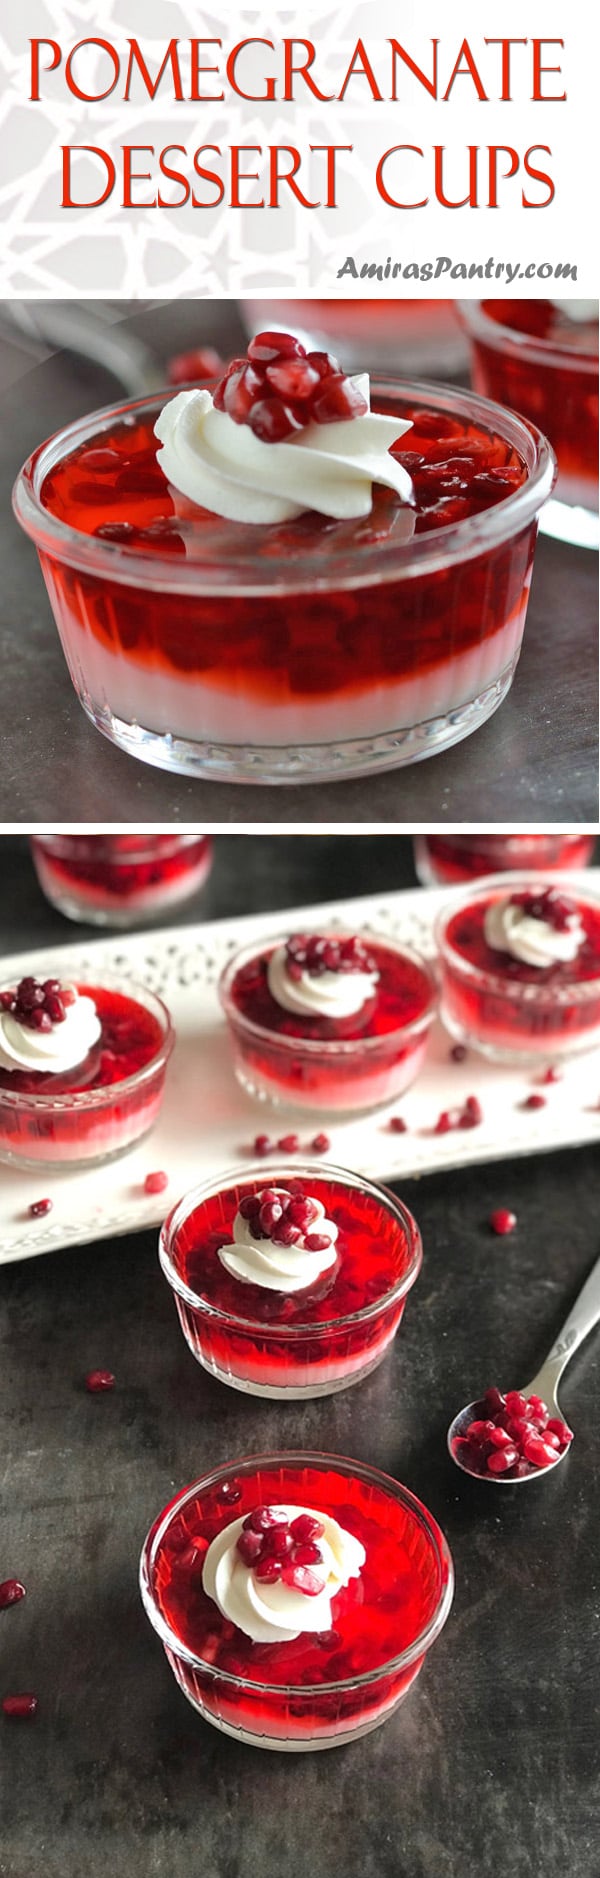 A plate with several glass cups with pomegranate parfaits